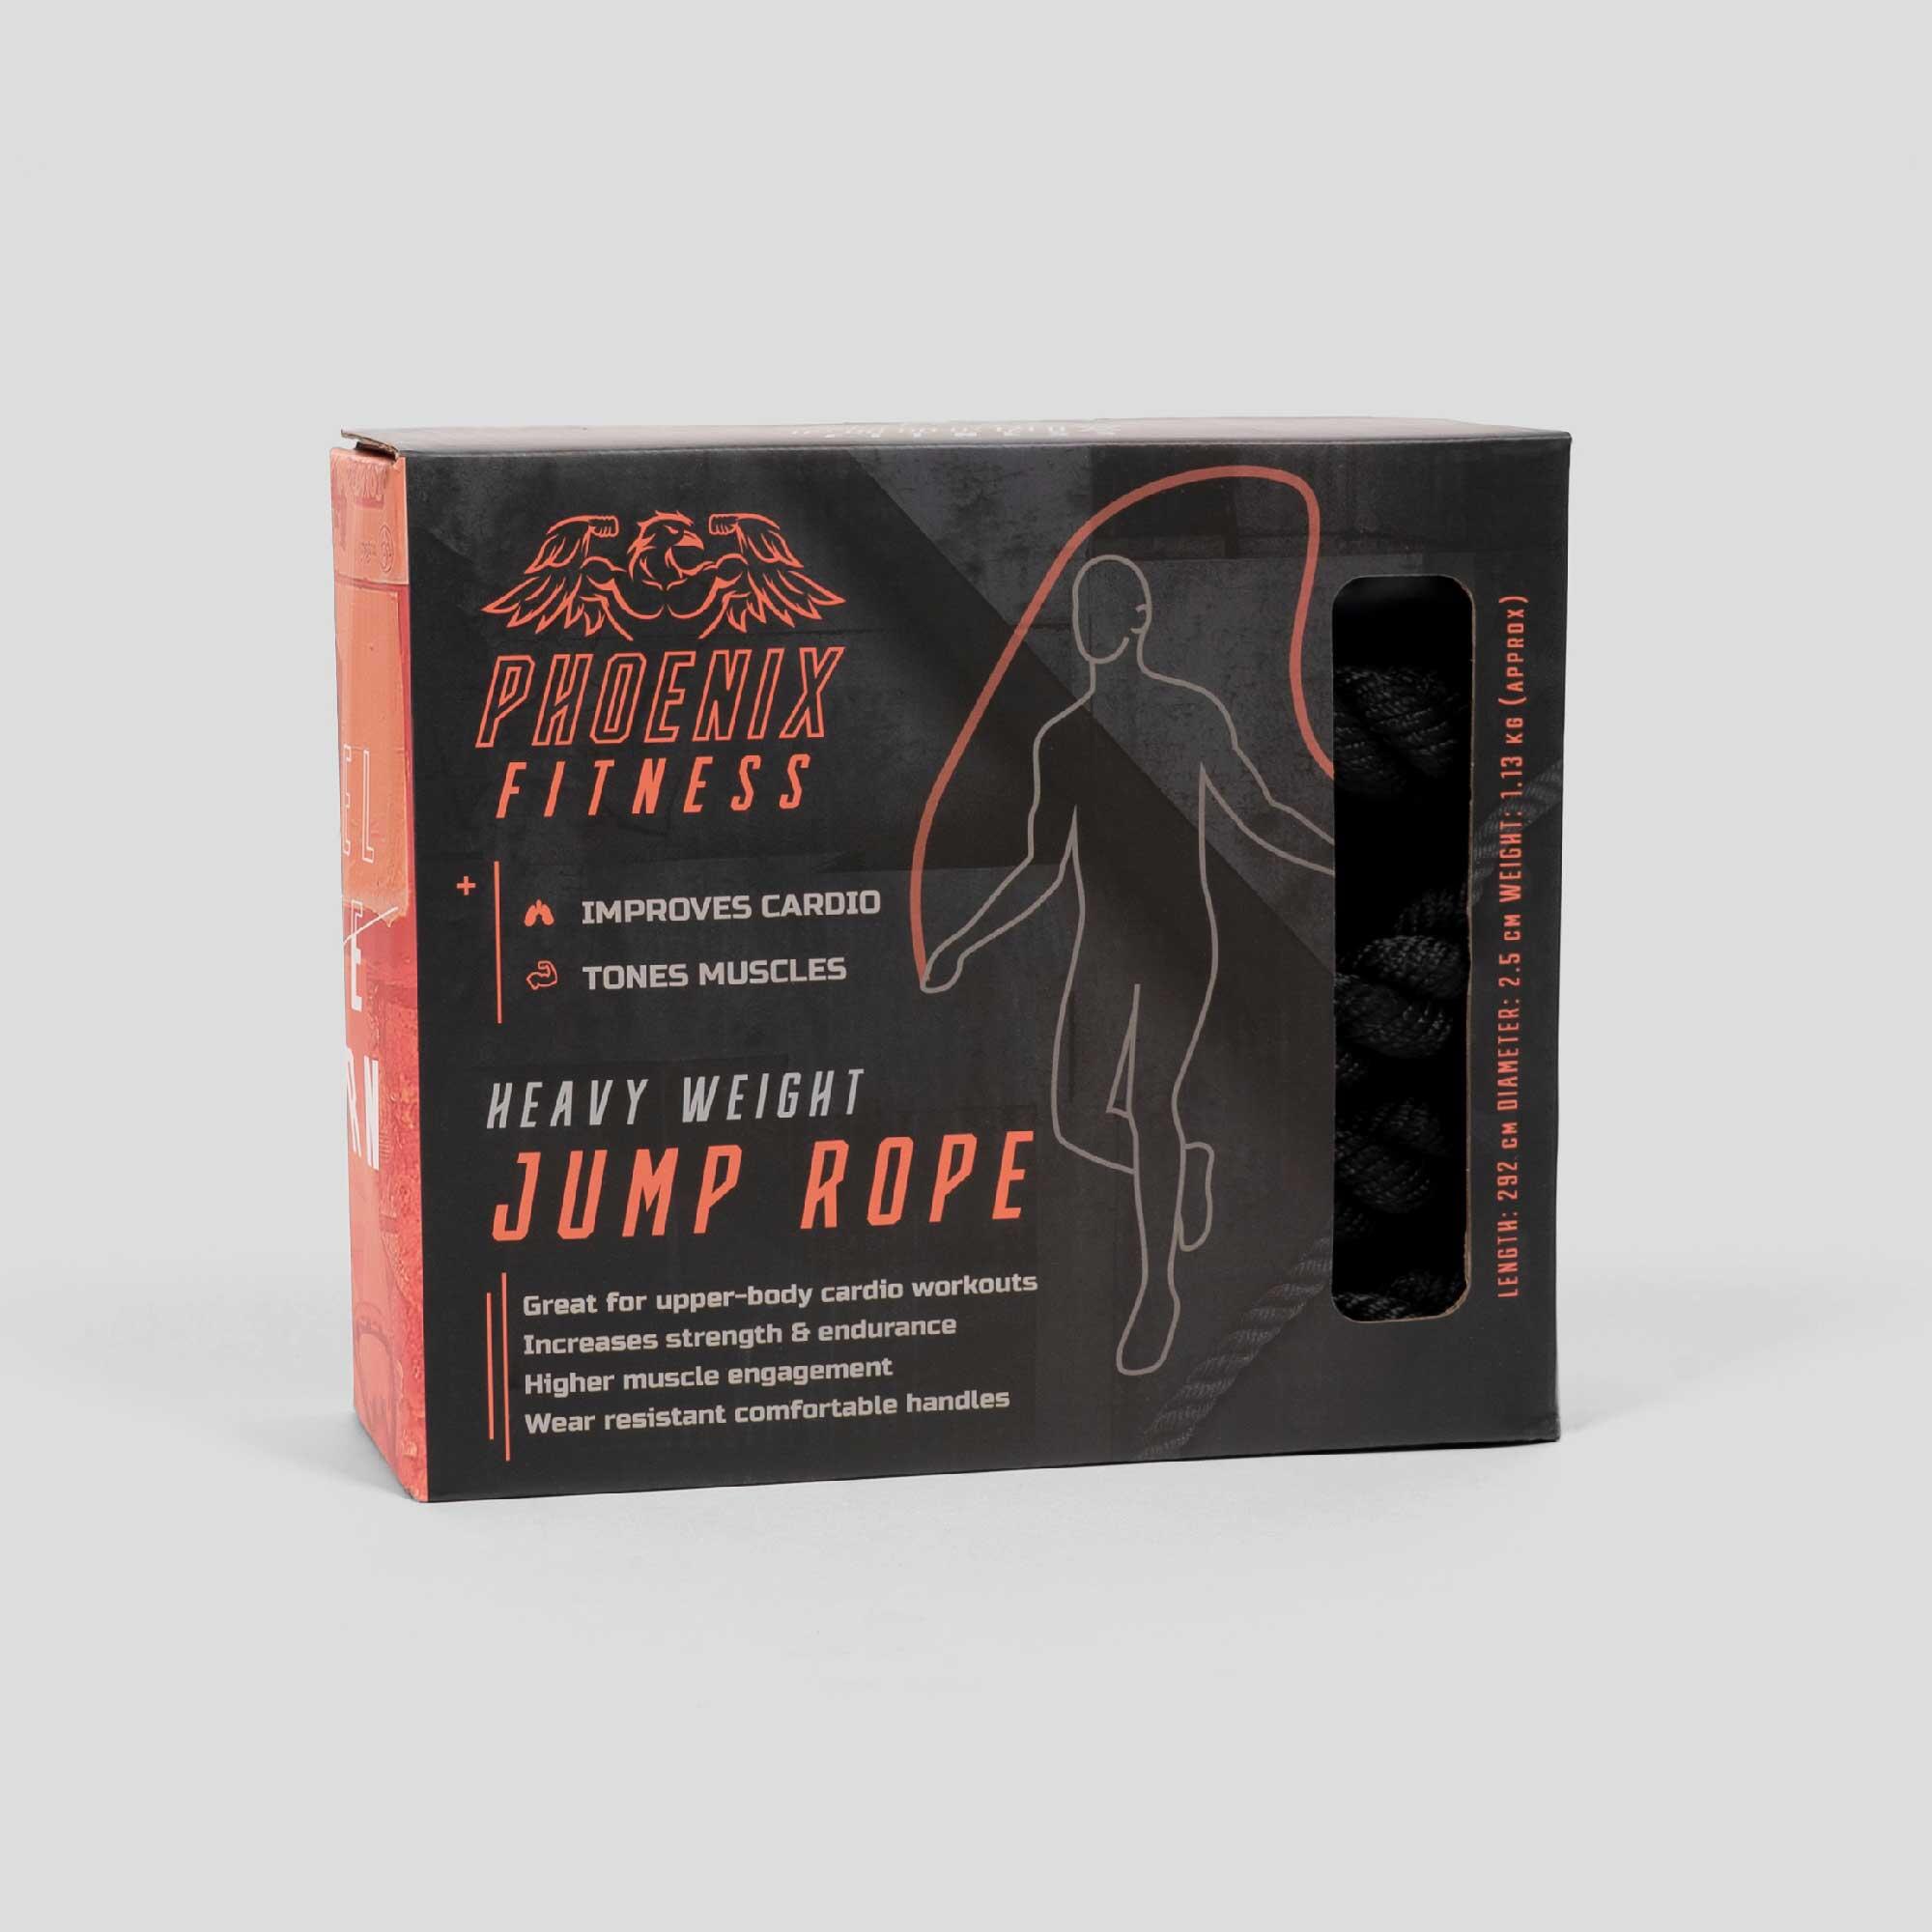 HEAVY WEIGHT JUMP ROPE 2/7